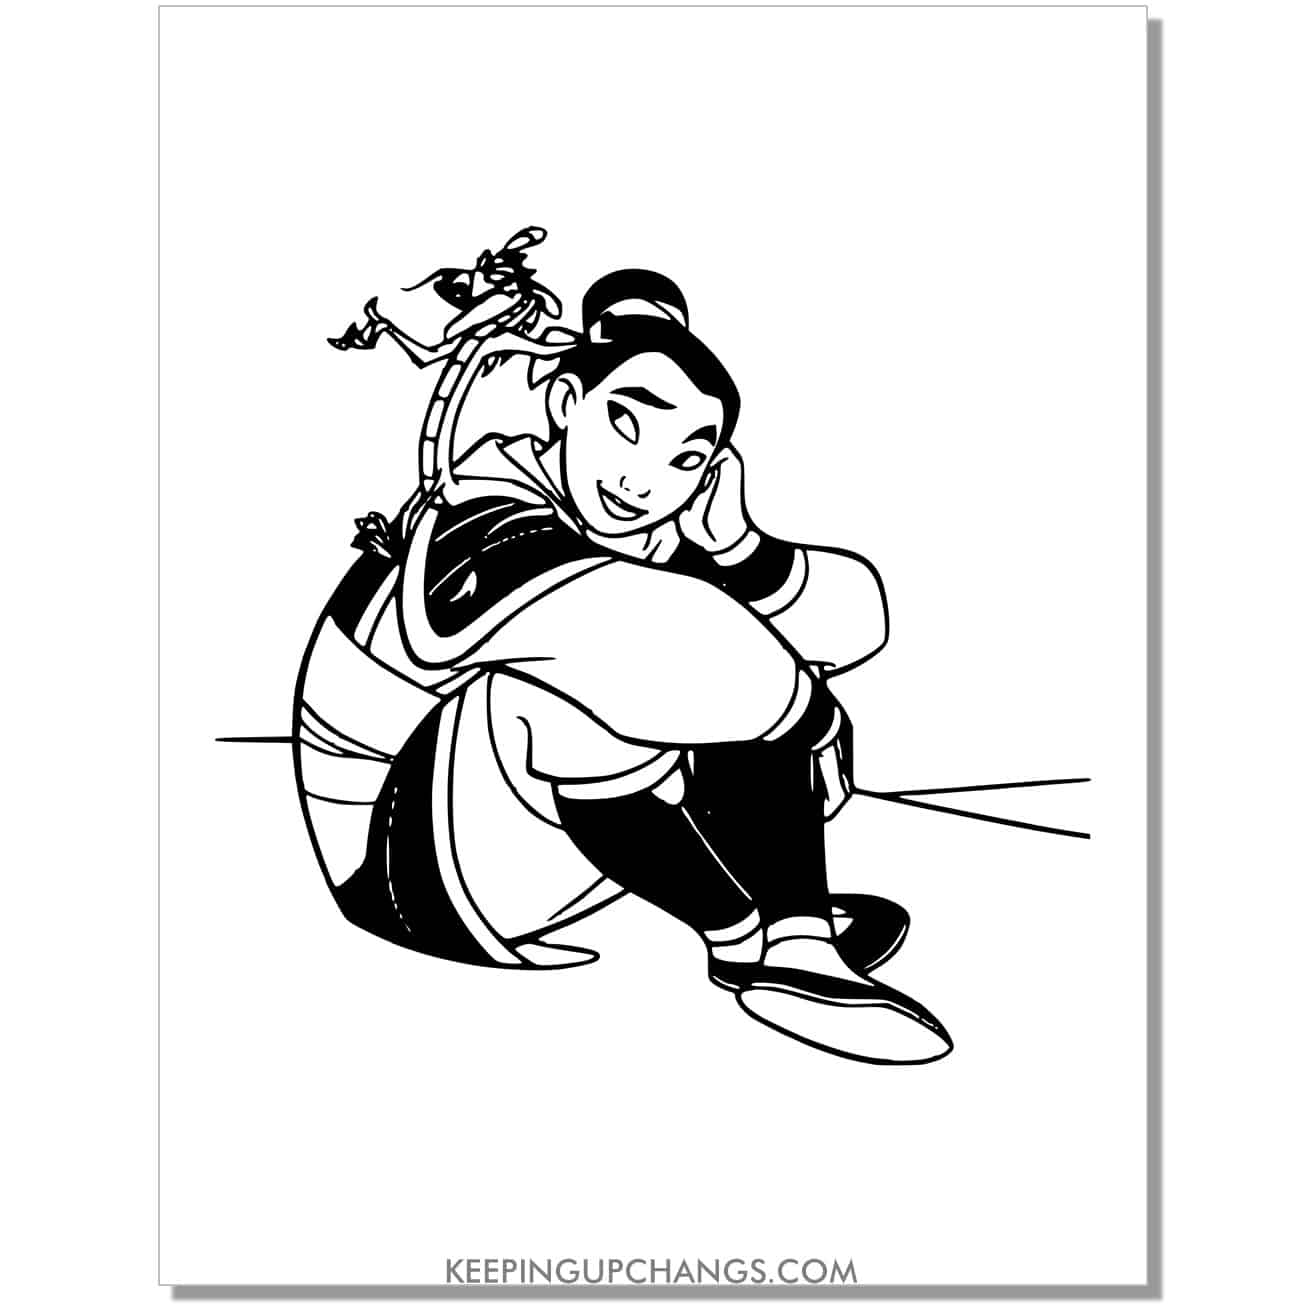 mulan as ping warrior in armor coloring page.